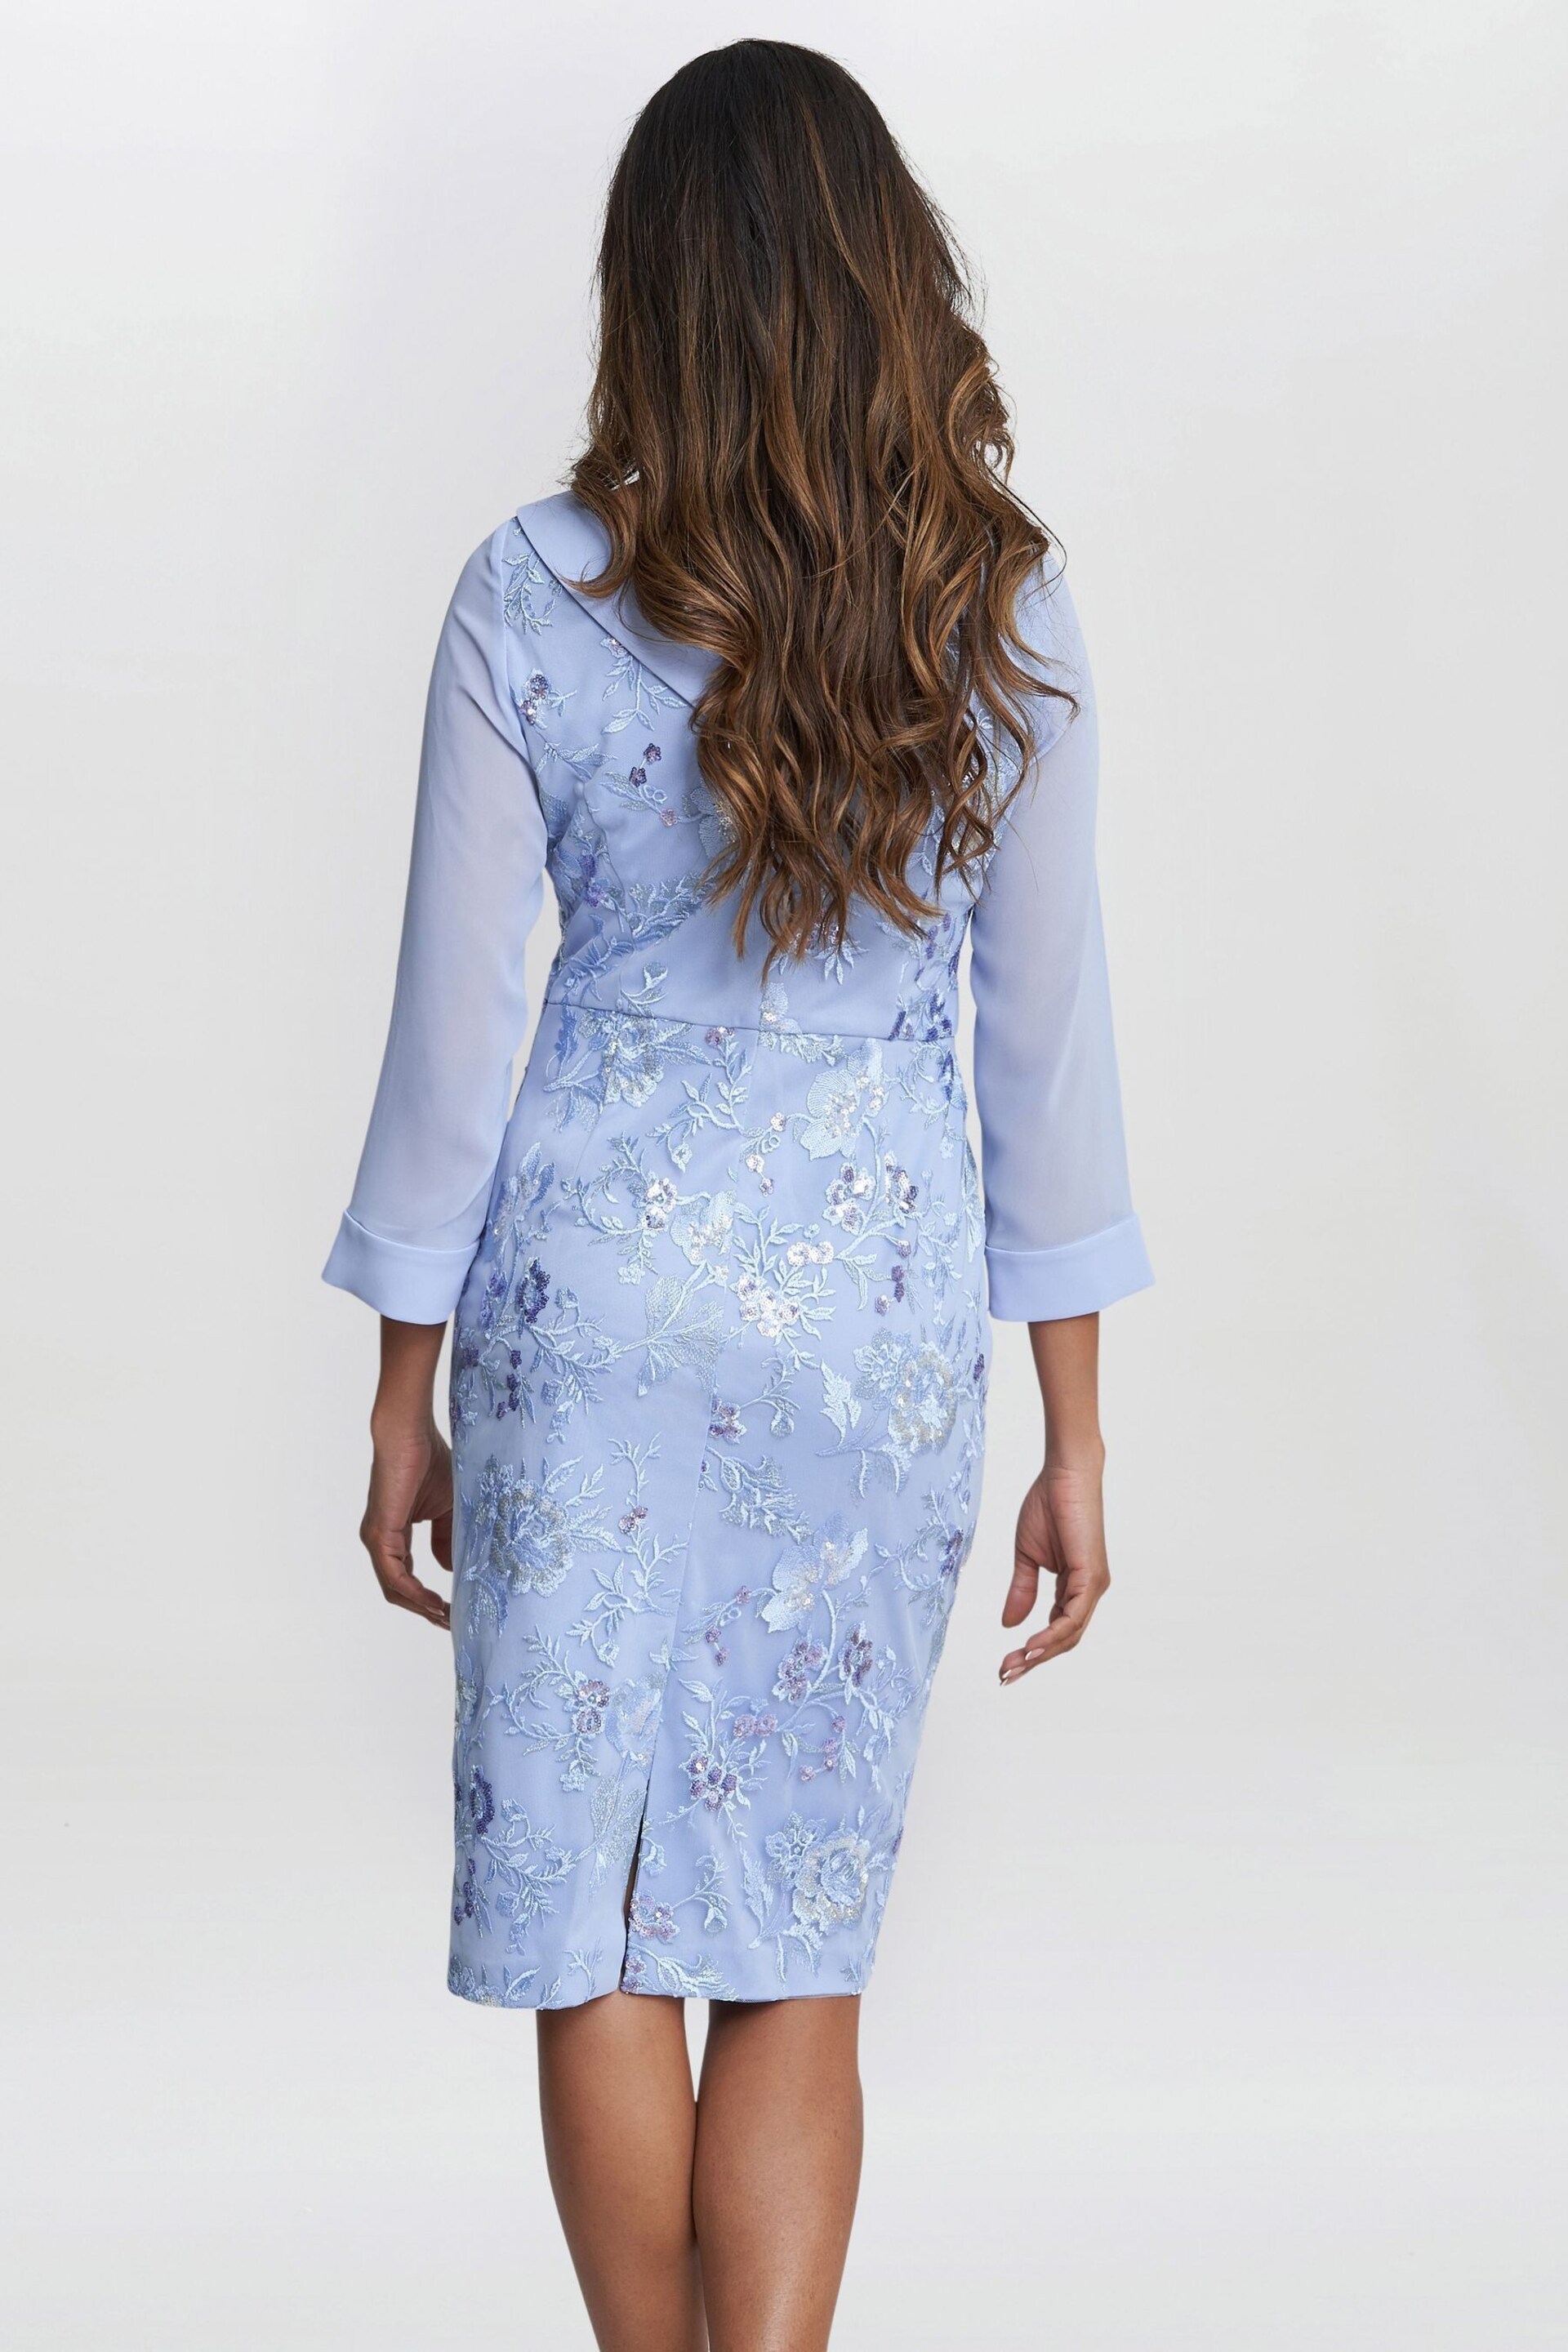 Gina Bacconi Blue Daisy Crepe Dress With Embroidery - Image 2 of 6